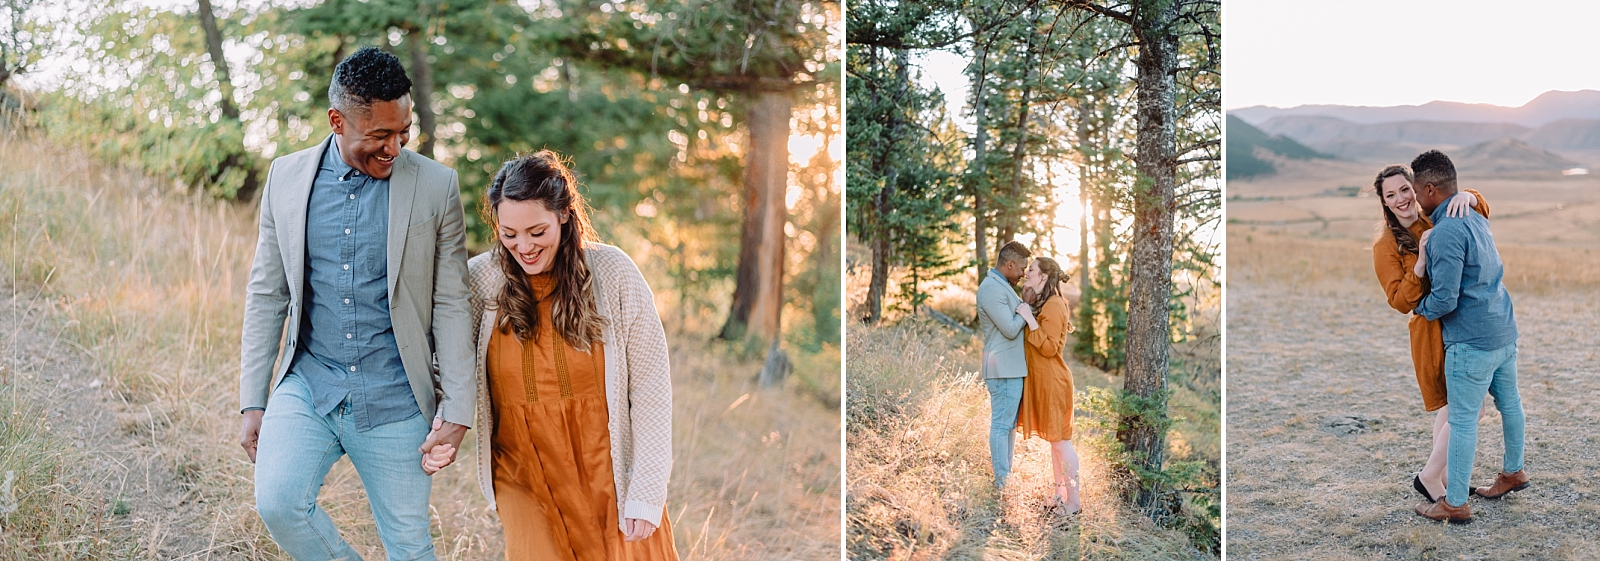 engaged couple photos love walking, snuggling, forest, mountains